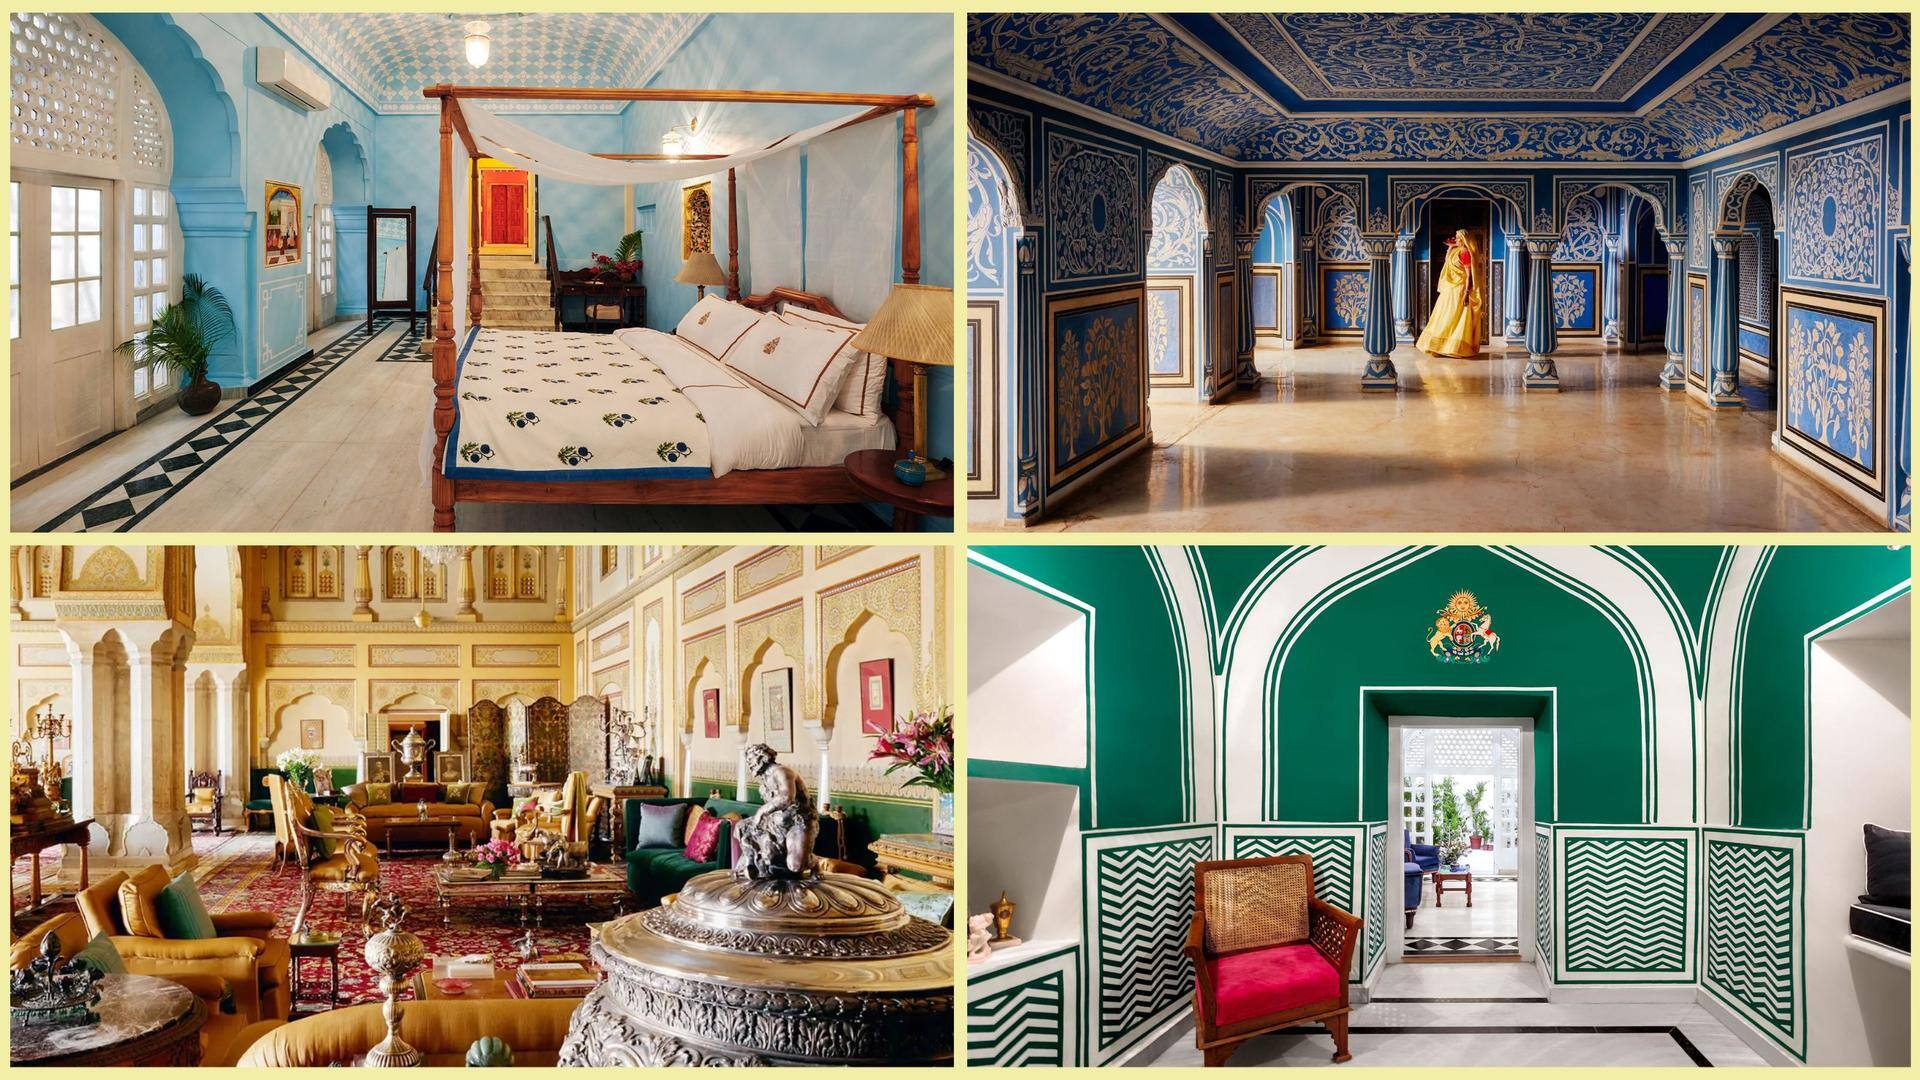 Why Jaipur's Gudliya suite costs Rs. 5.7 lakh/night